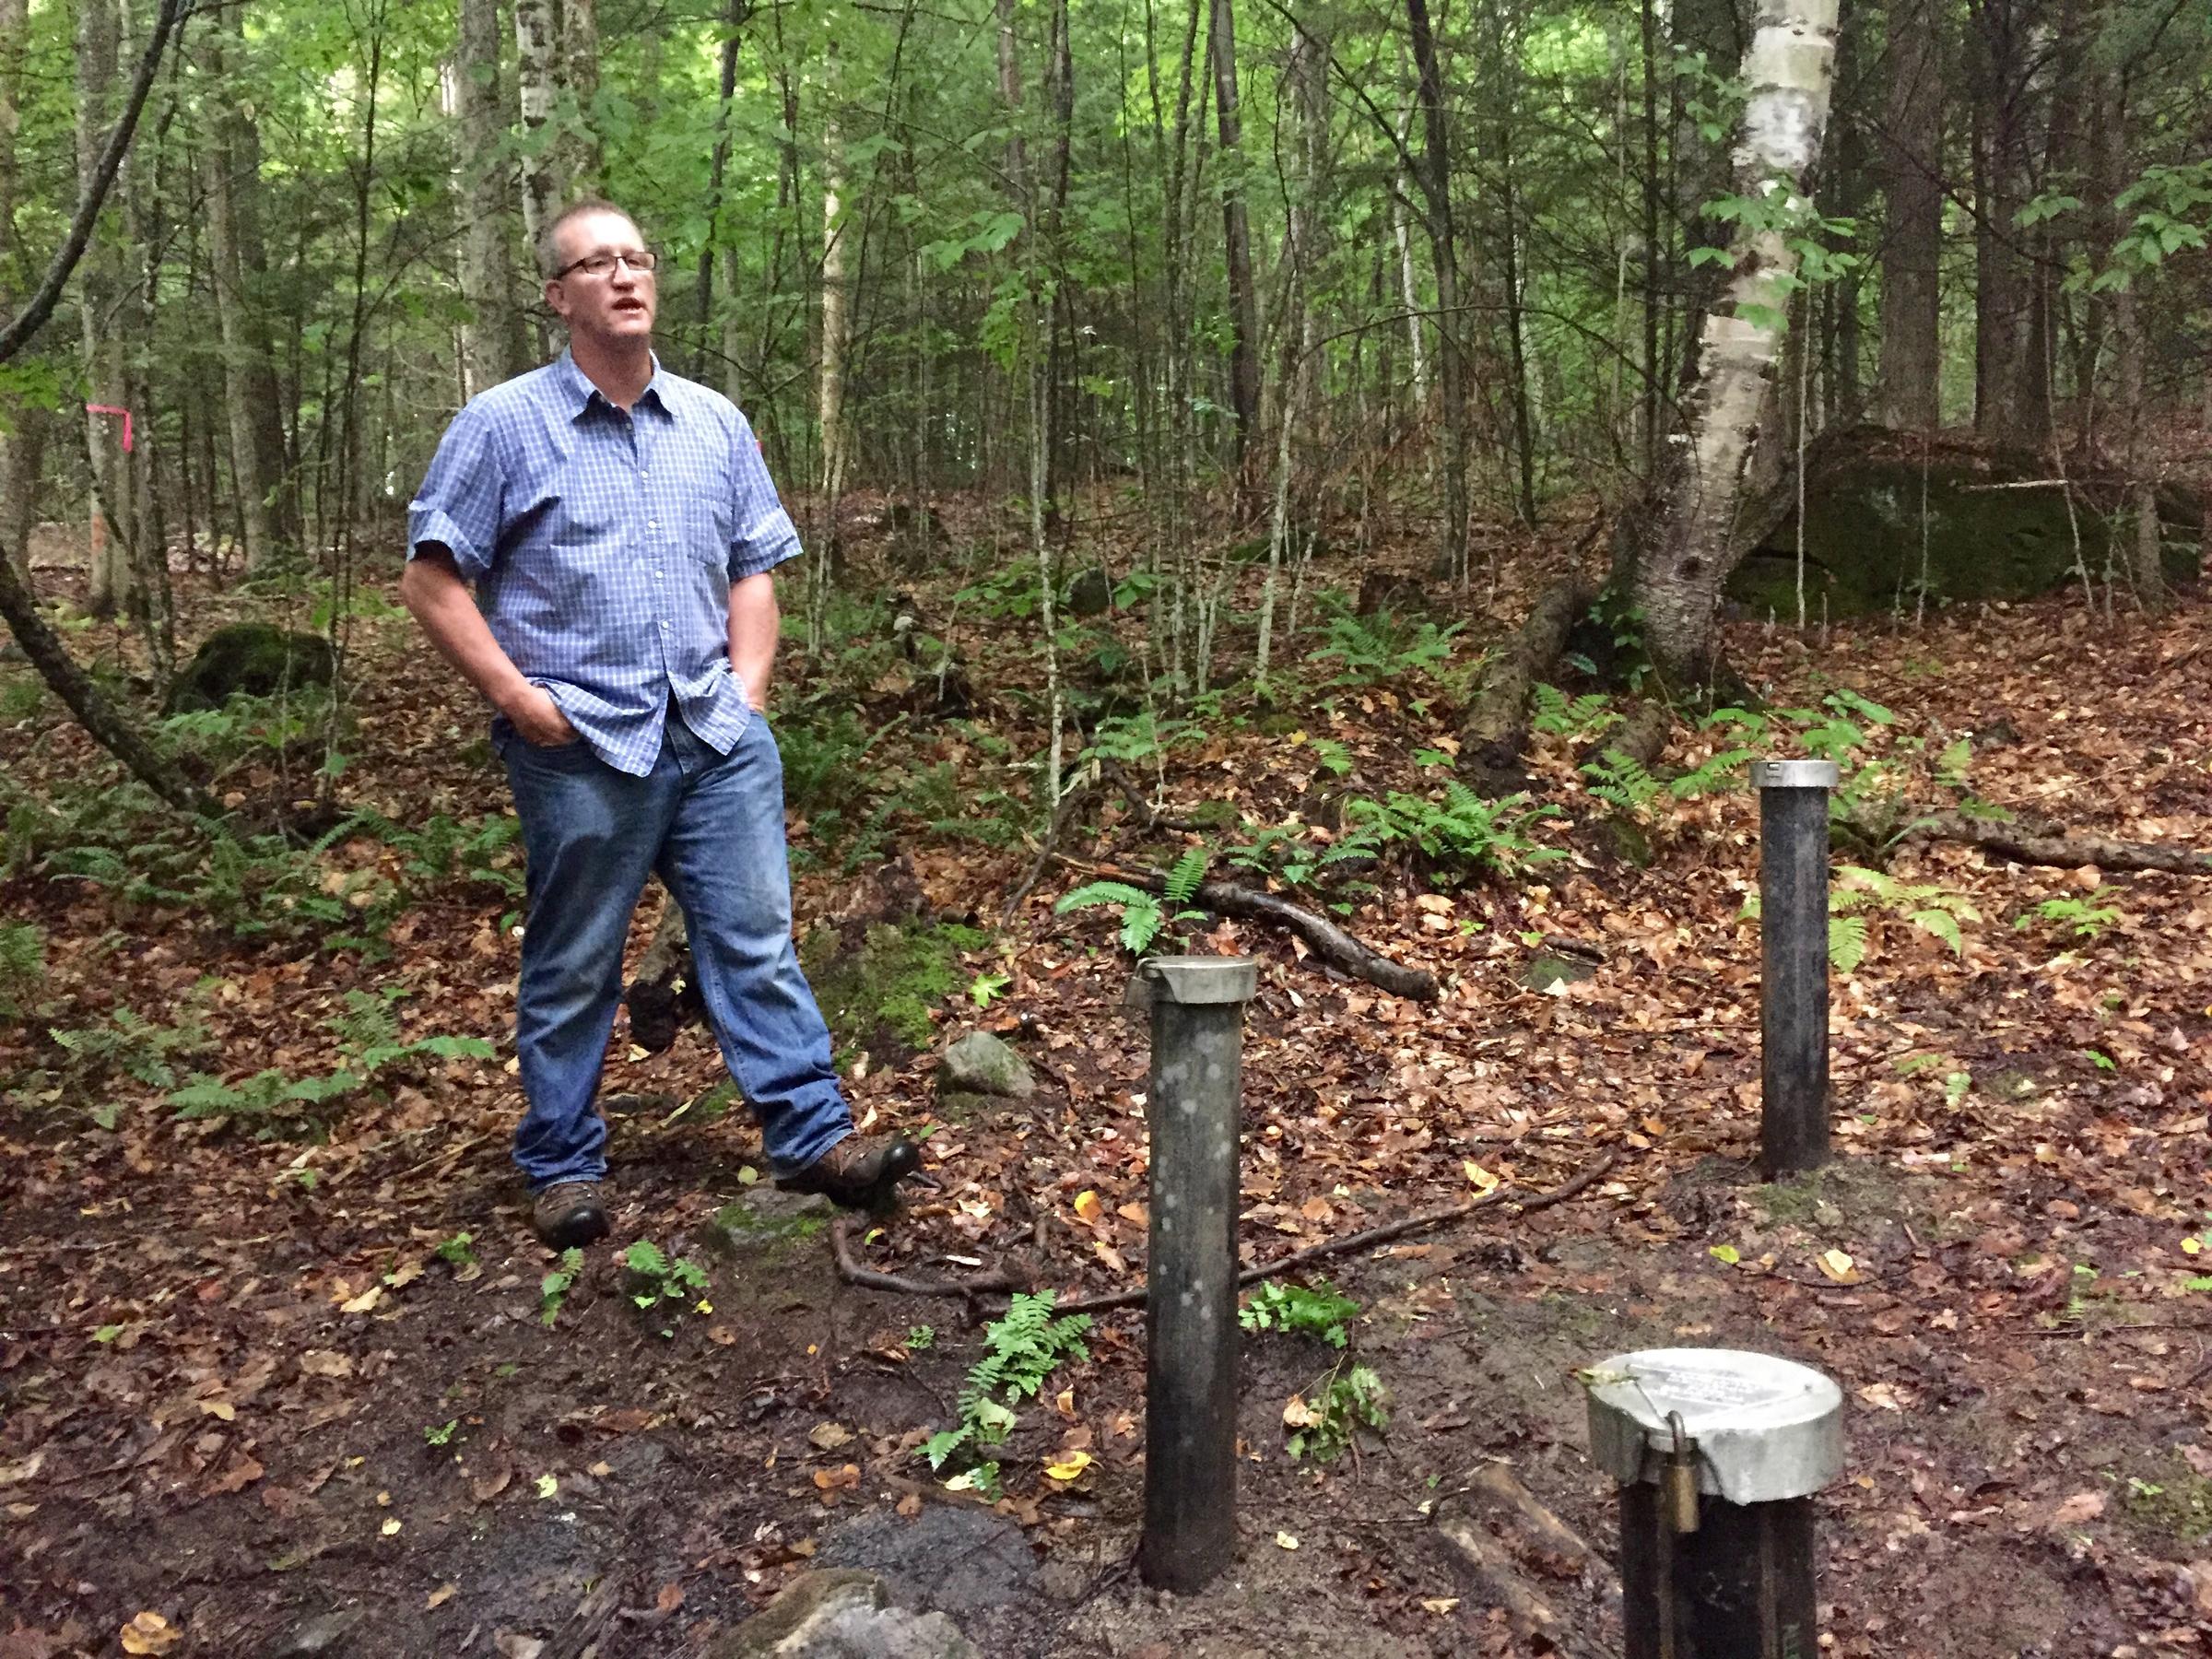 Hanover resident Richard Higgins stands near a well 375 feet away from his property, where groundwater tests have shown hundreds of times the New Hampshire state-alloted amount of the chemical 1,4-dioxane, a suspected carcinogen. REBECCA SANANES / VPR